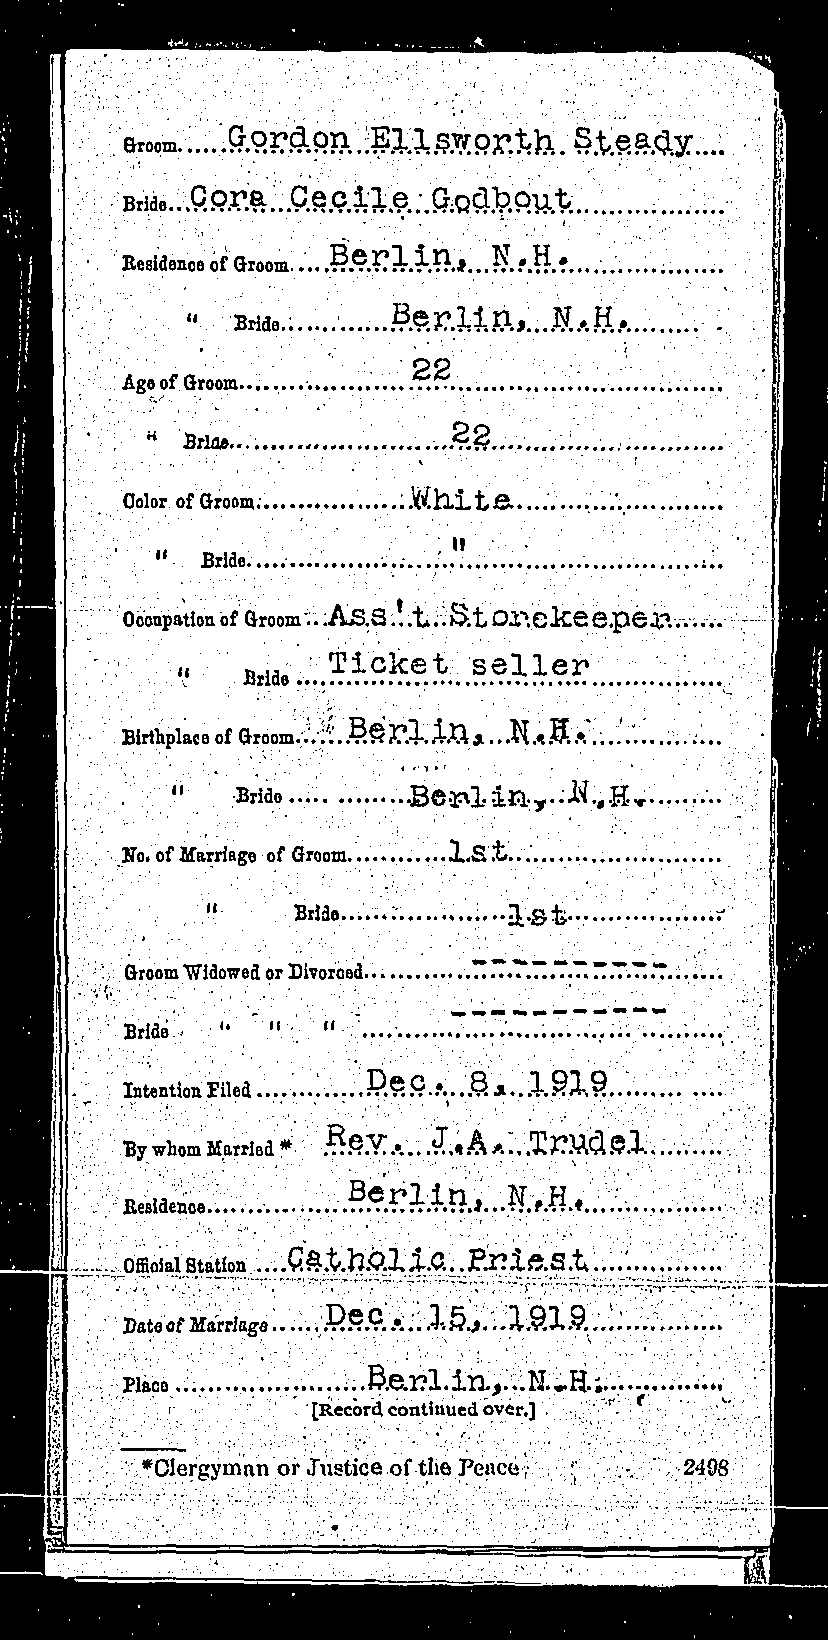 Gordon Ellsworth Steady and Cora Cecile Godbout marriage record